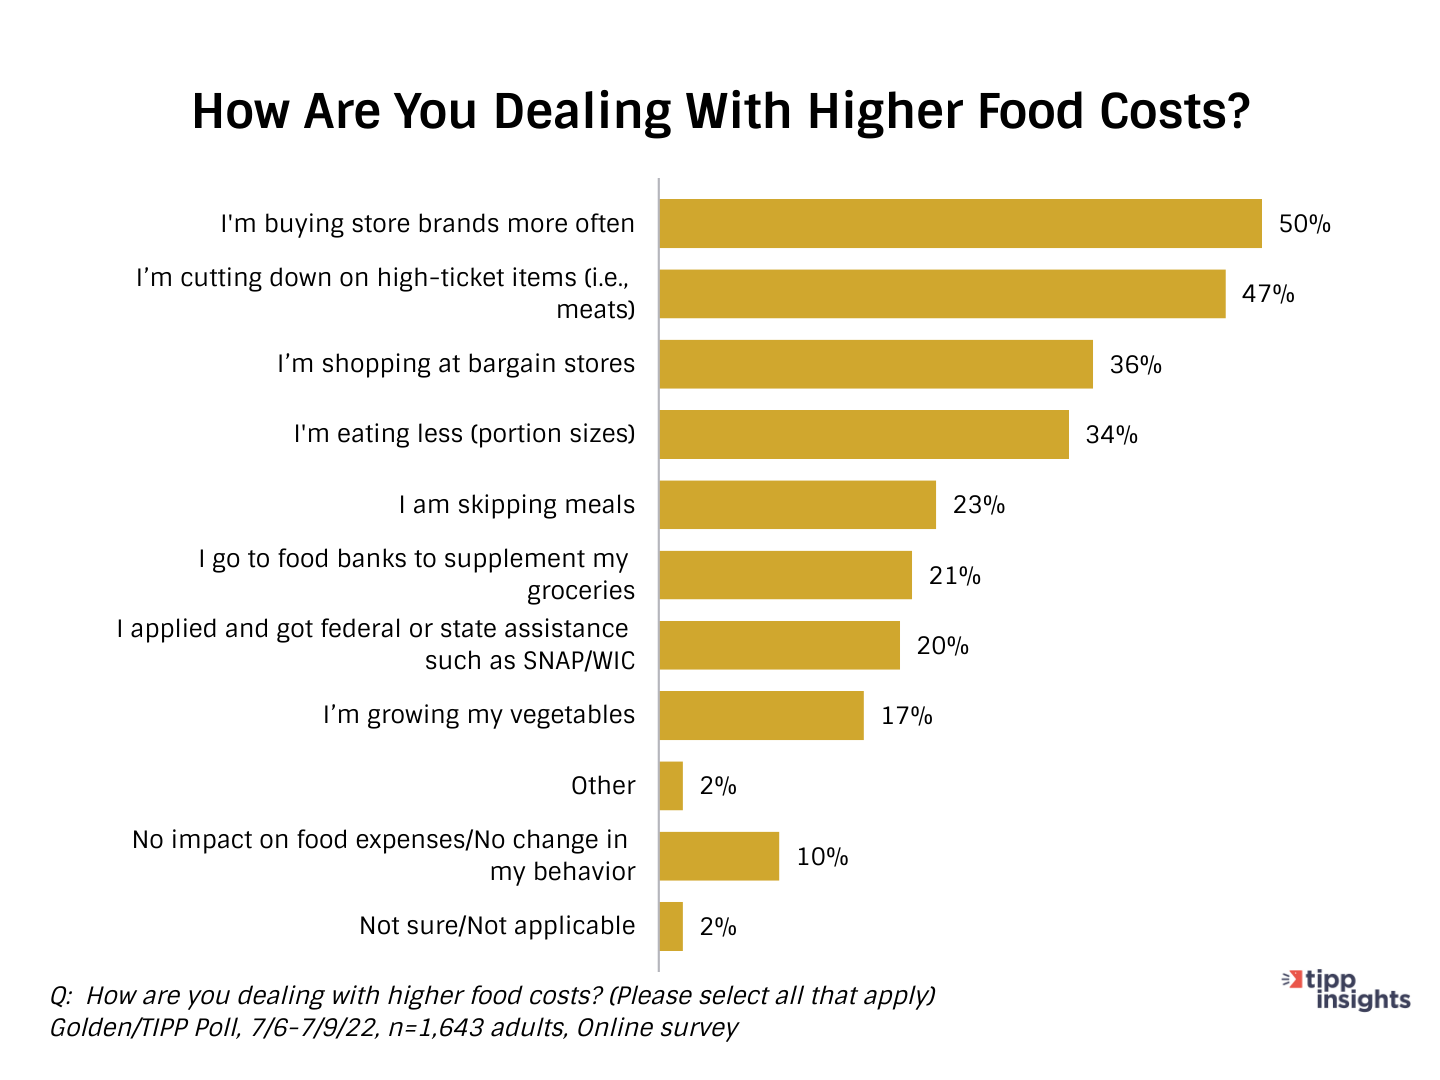 Golden/TIPP Poll Results: How are americans dealing with higher food costs?